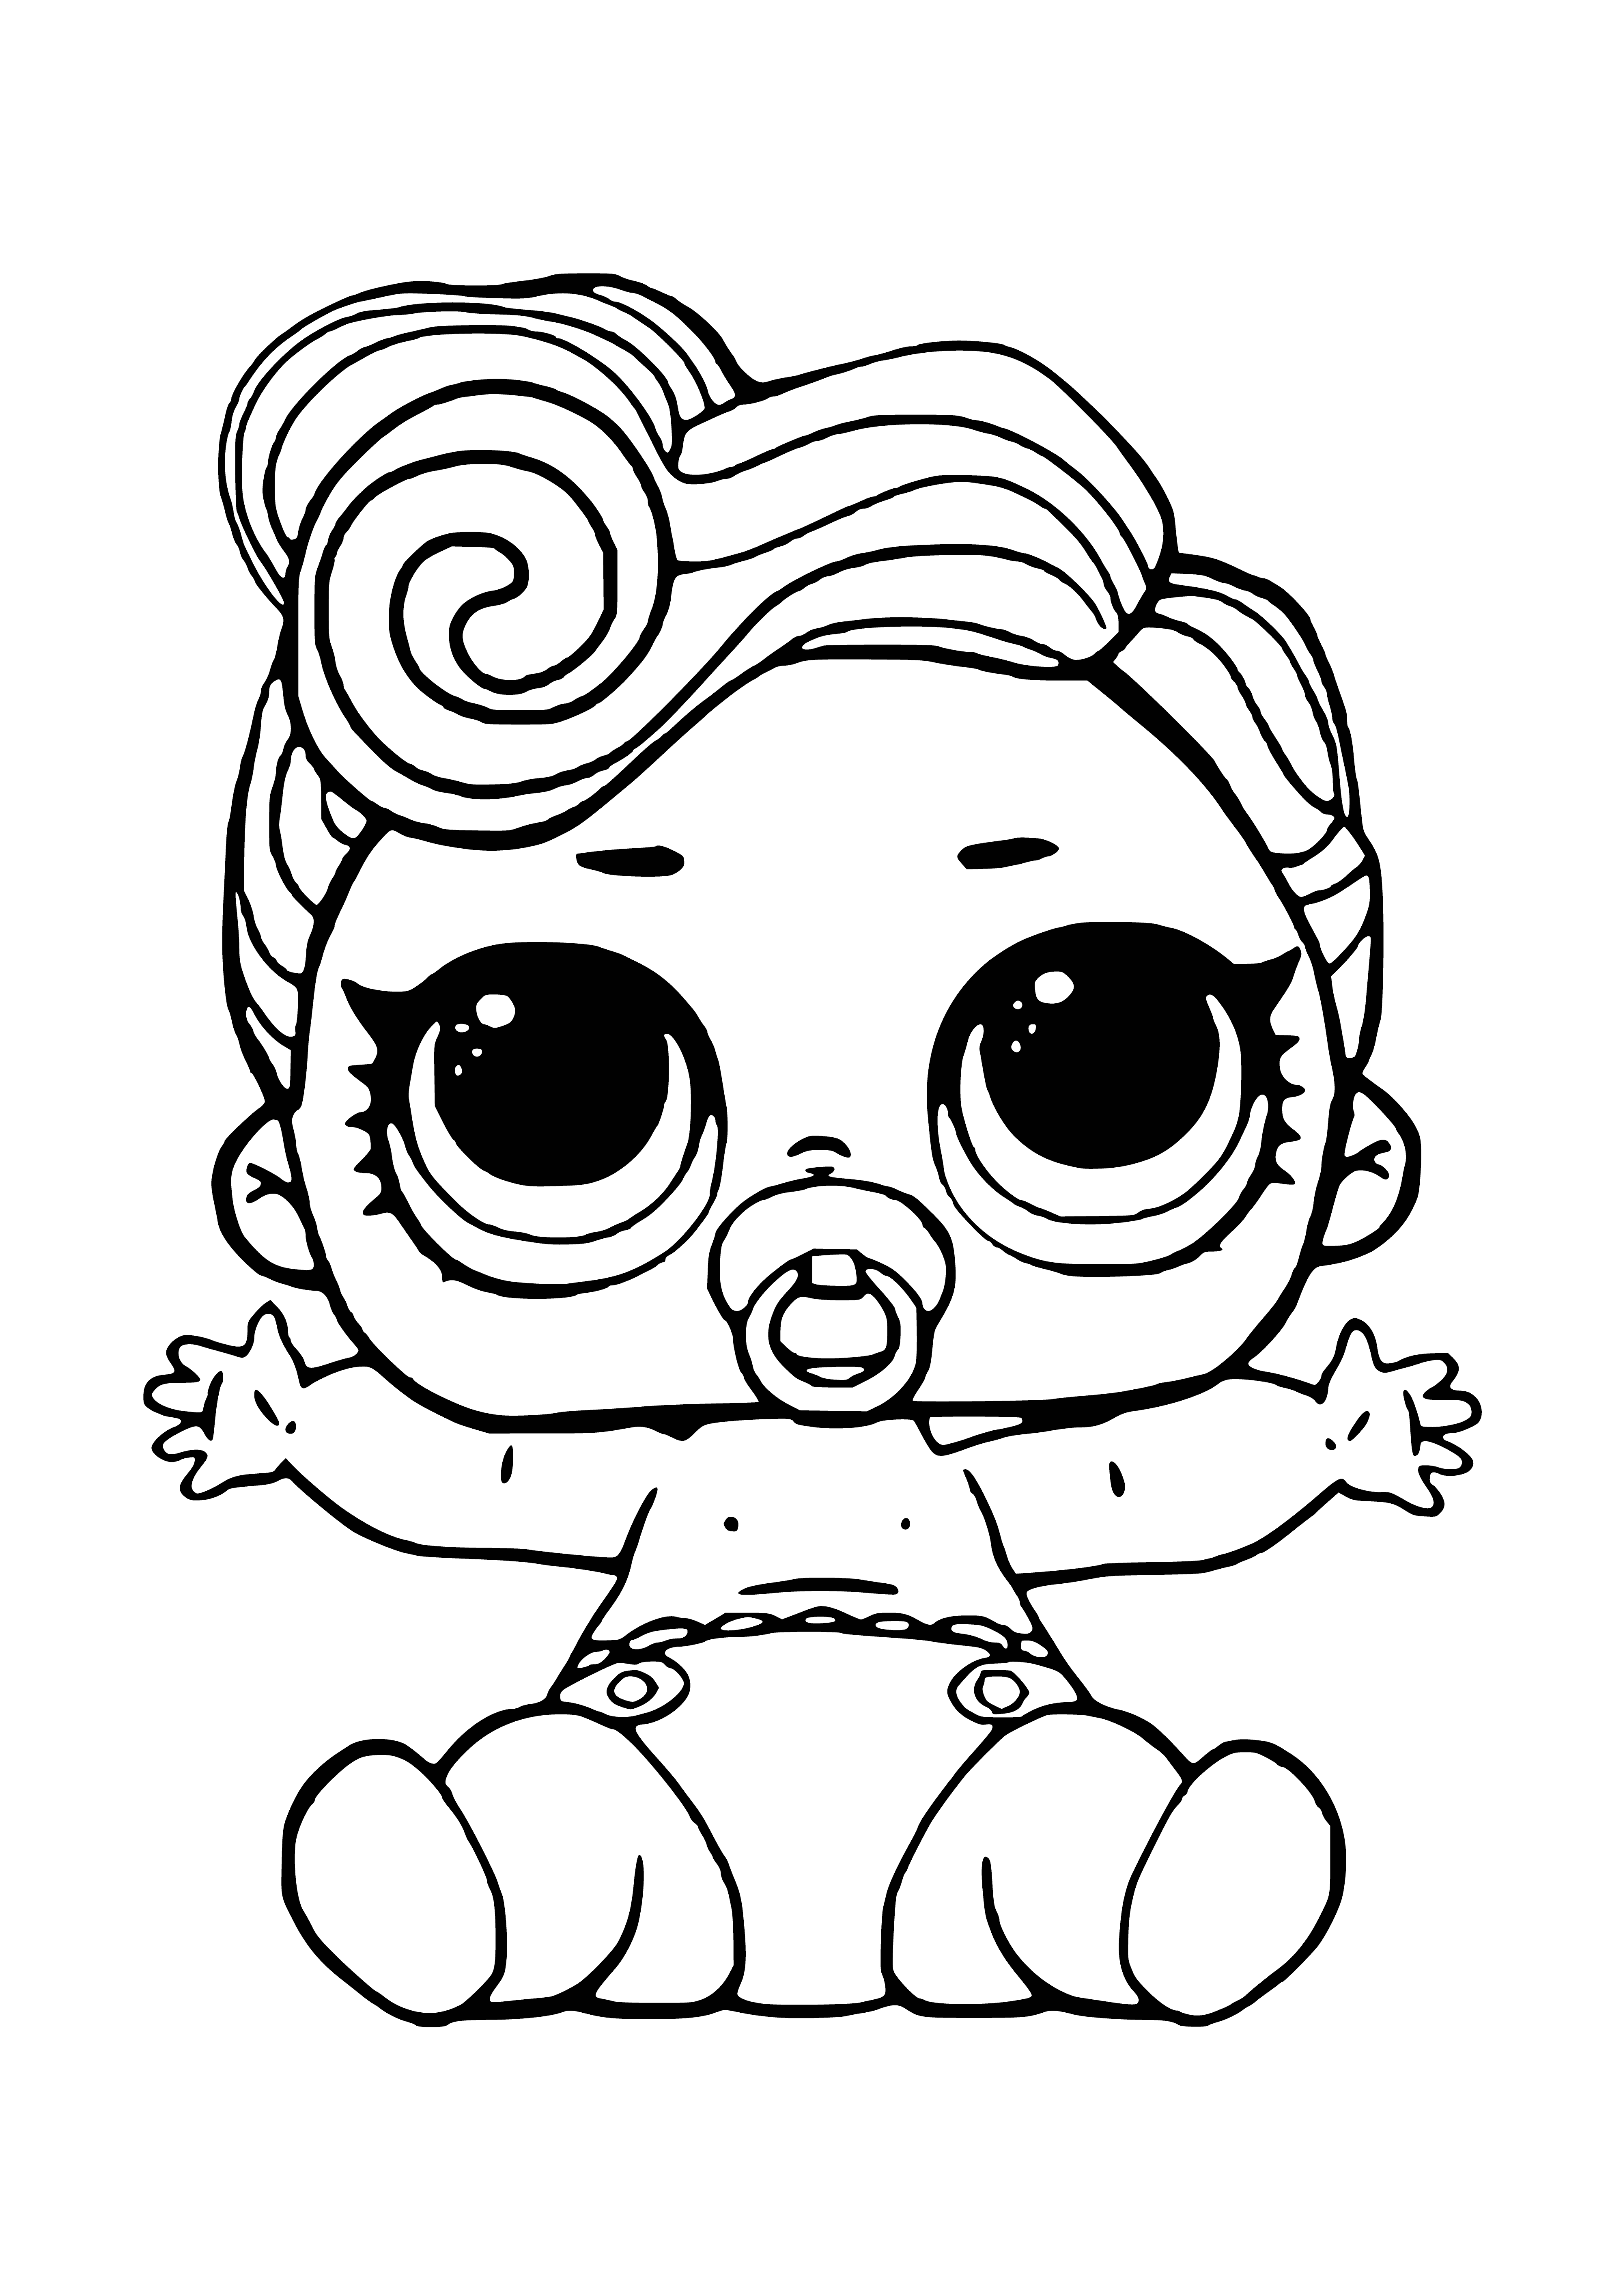 coloring page: A small baby girl in a white onesie sits with a plush toy in her lap. She has soft blond hair, big blue eyes and is snuggled up with a pillow.